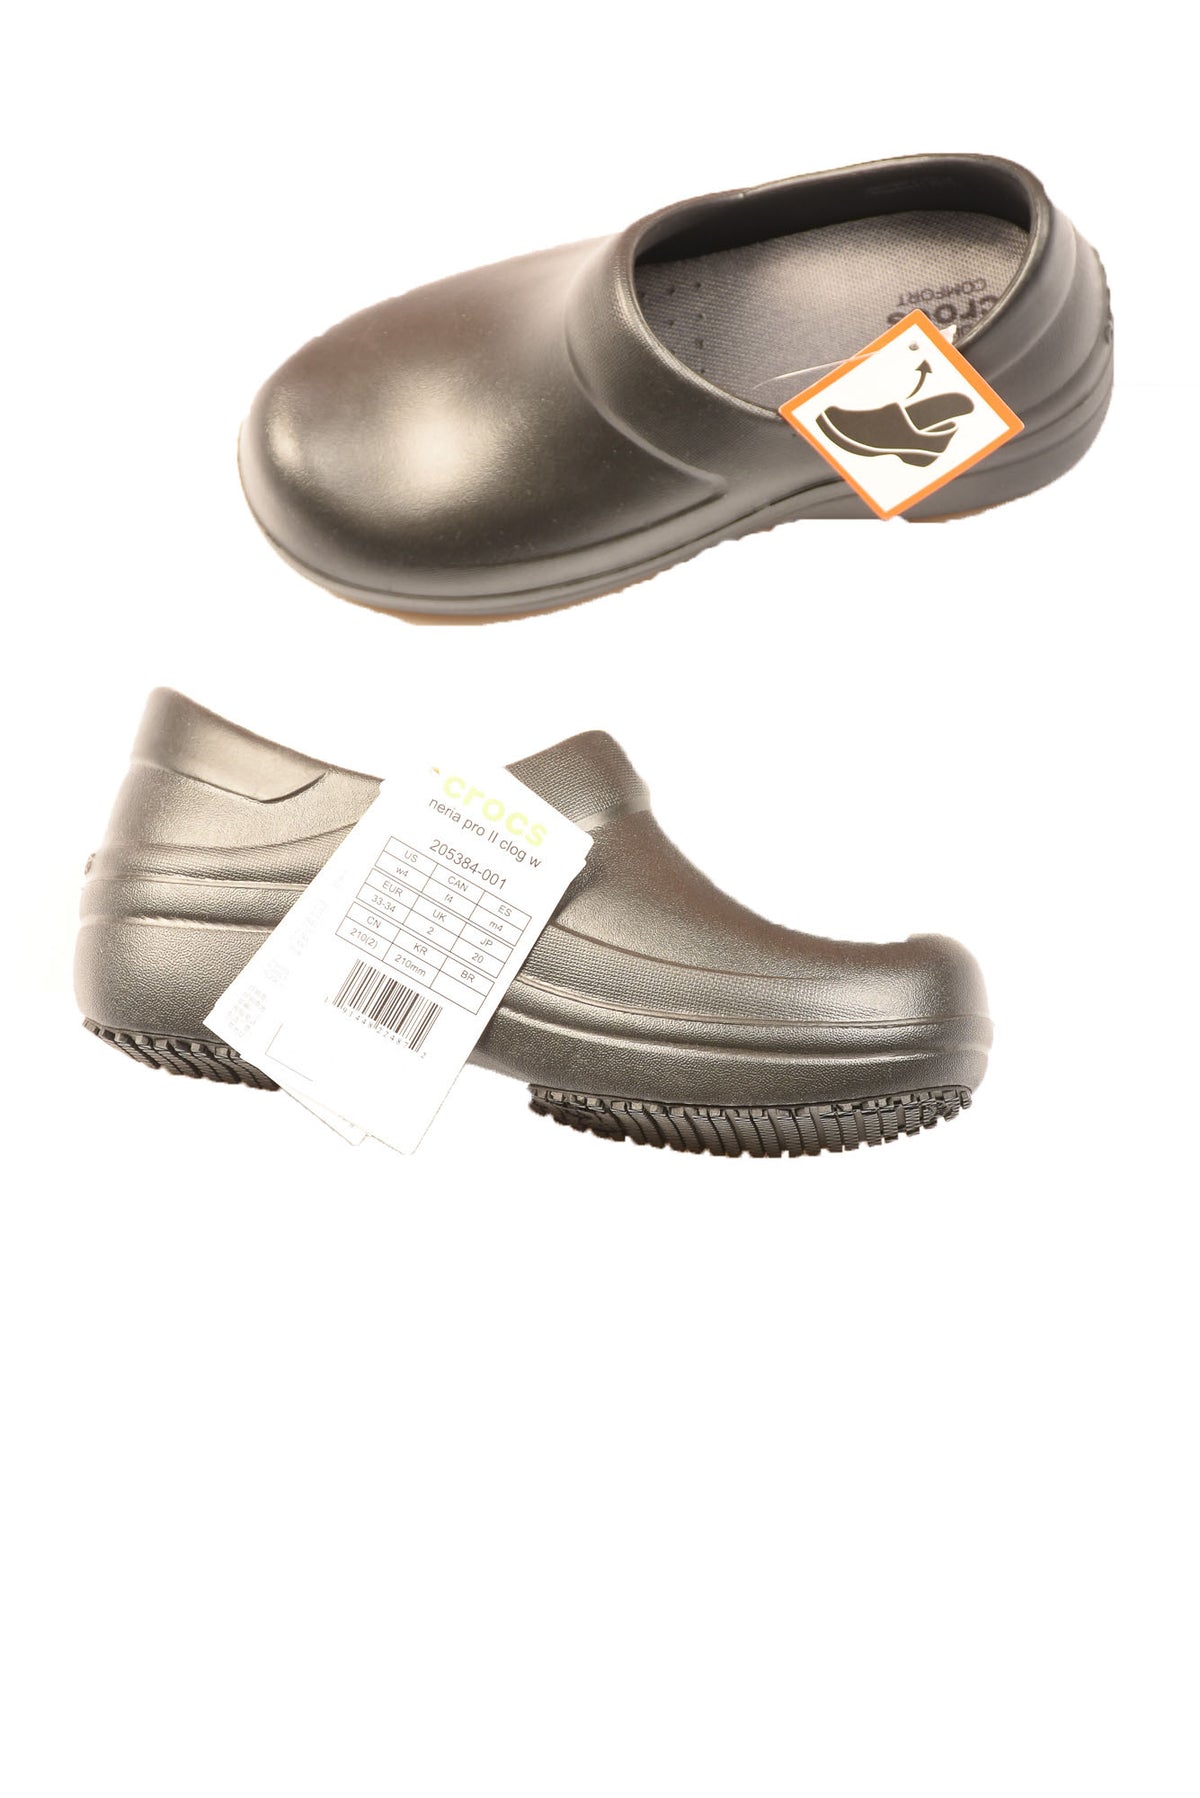 Women's Shoes By Crocs - Your Designer Thrift